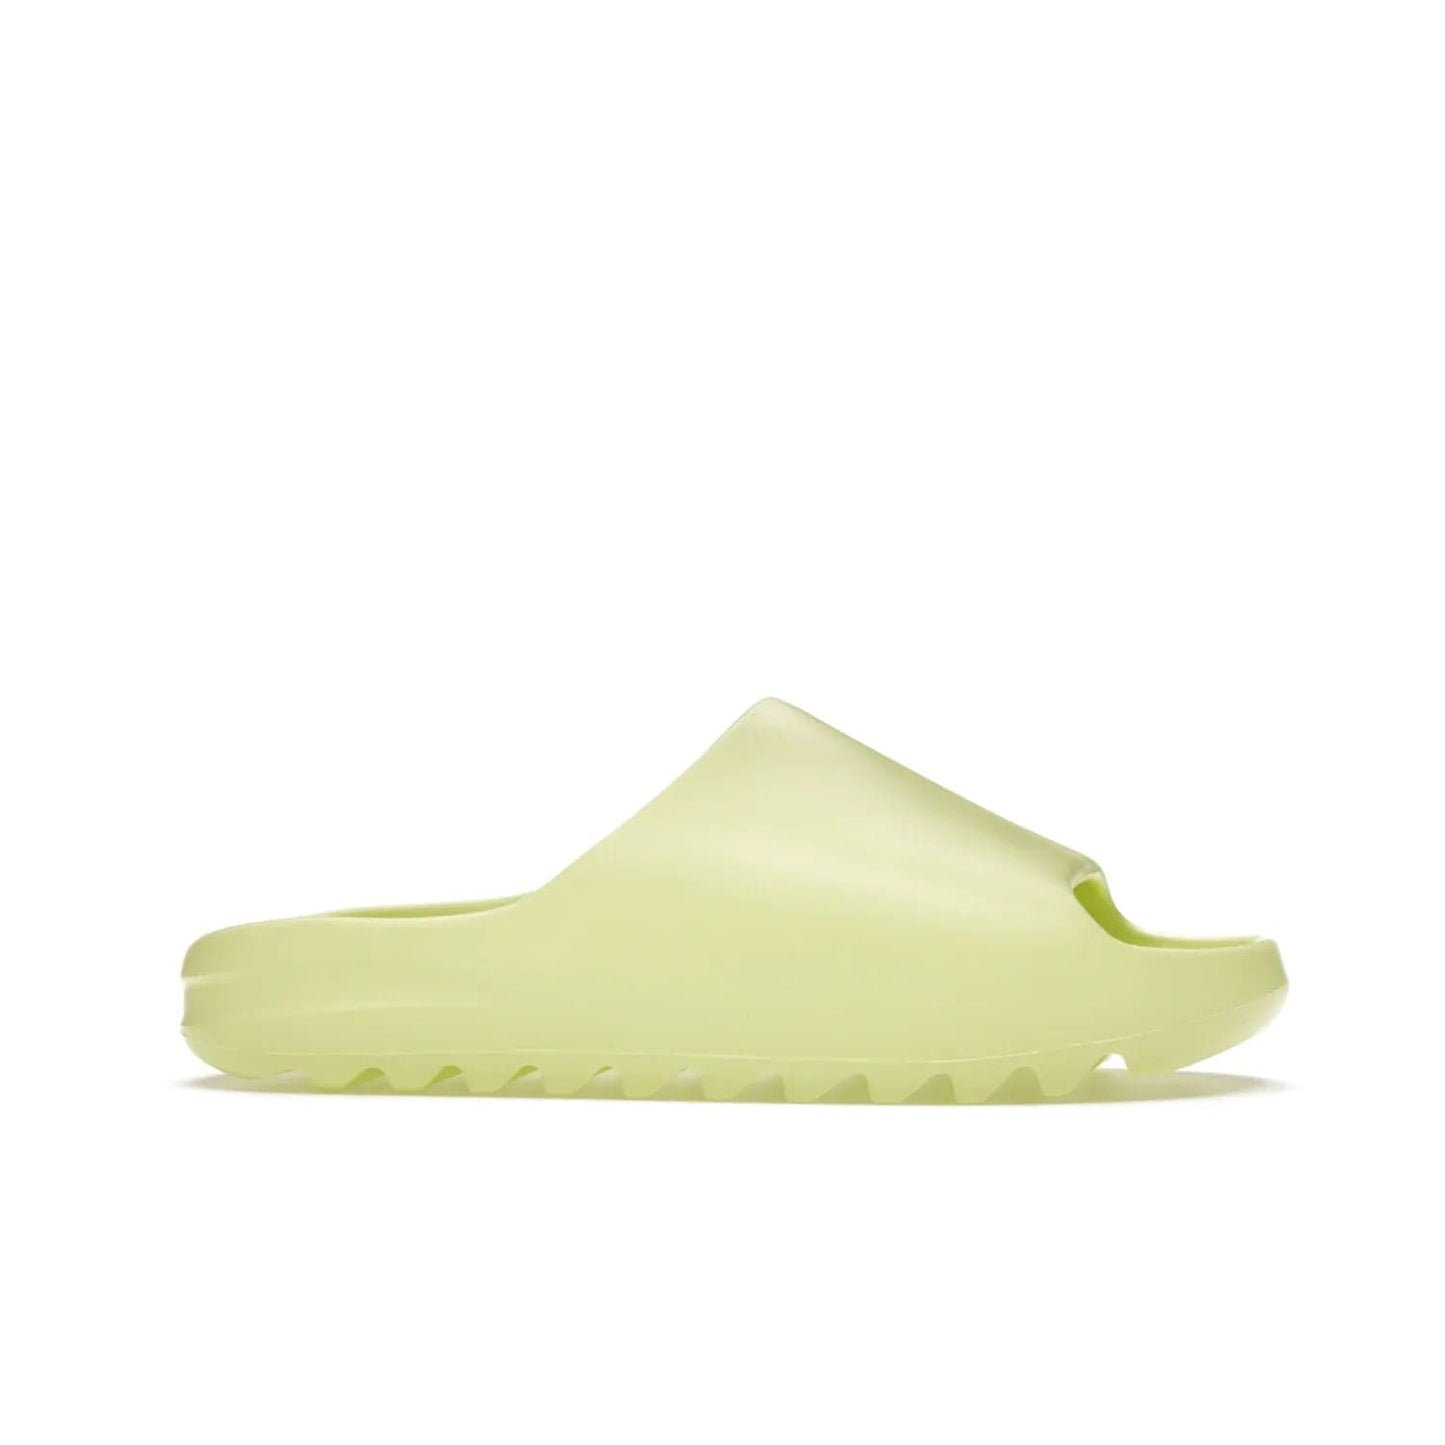 adidas Yeezy Slide Glow Green - Image 2 - Only at www.BallersClubKickz.com - Experience an unexpected summer style with the adidas Yeezy Slide Glow Green. This limited edition slide sandal provides a lightweight and durable construction and a bold Glow Green hue. Strategic grooves enhance traction and provide all-day comfort. Make a statement with the adidas Yeezy Slide Glow Green.